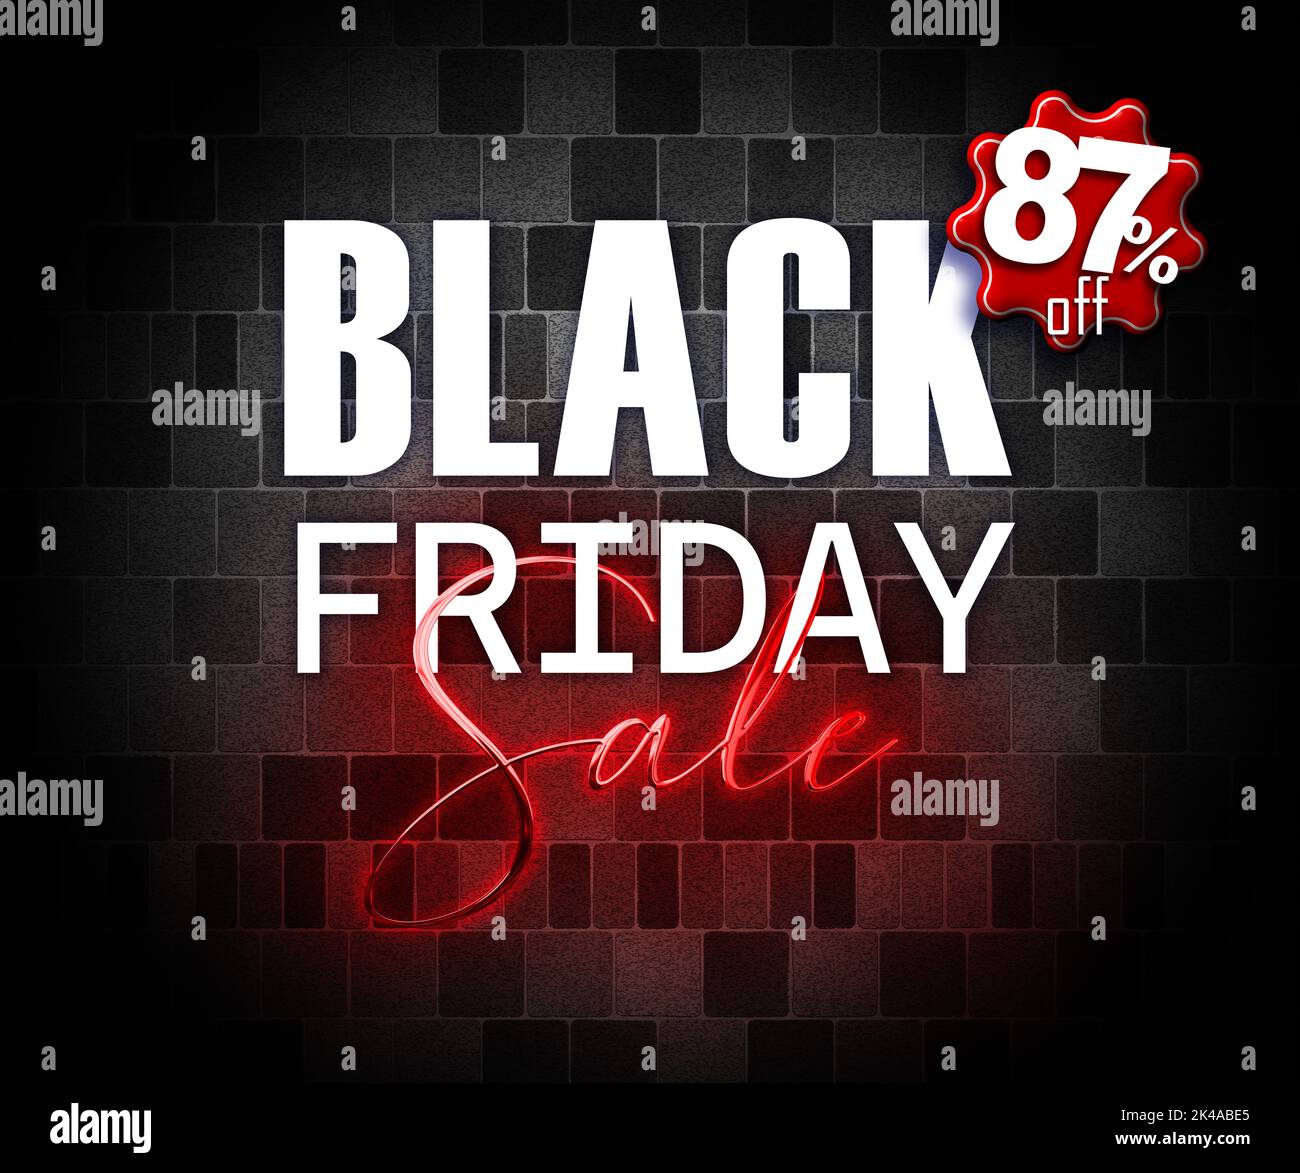 illustration with 3d elements black friday promotion banner 87 percent off sales increase Stock Photo